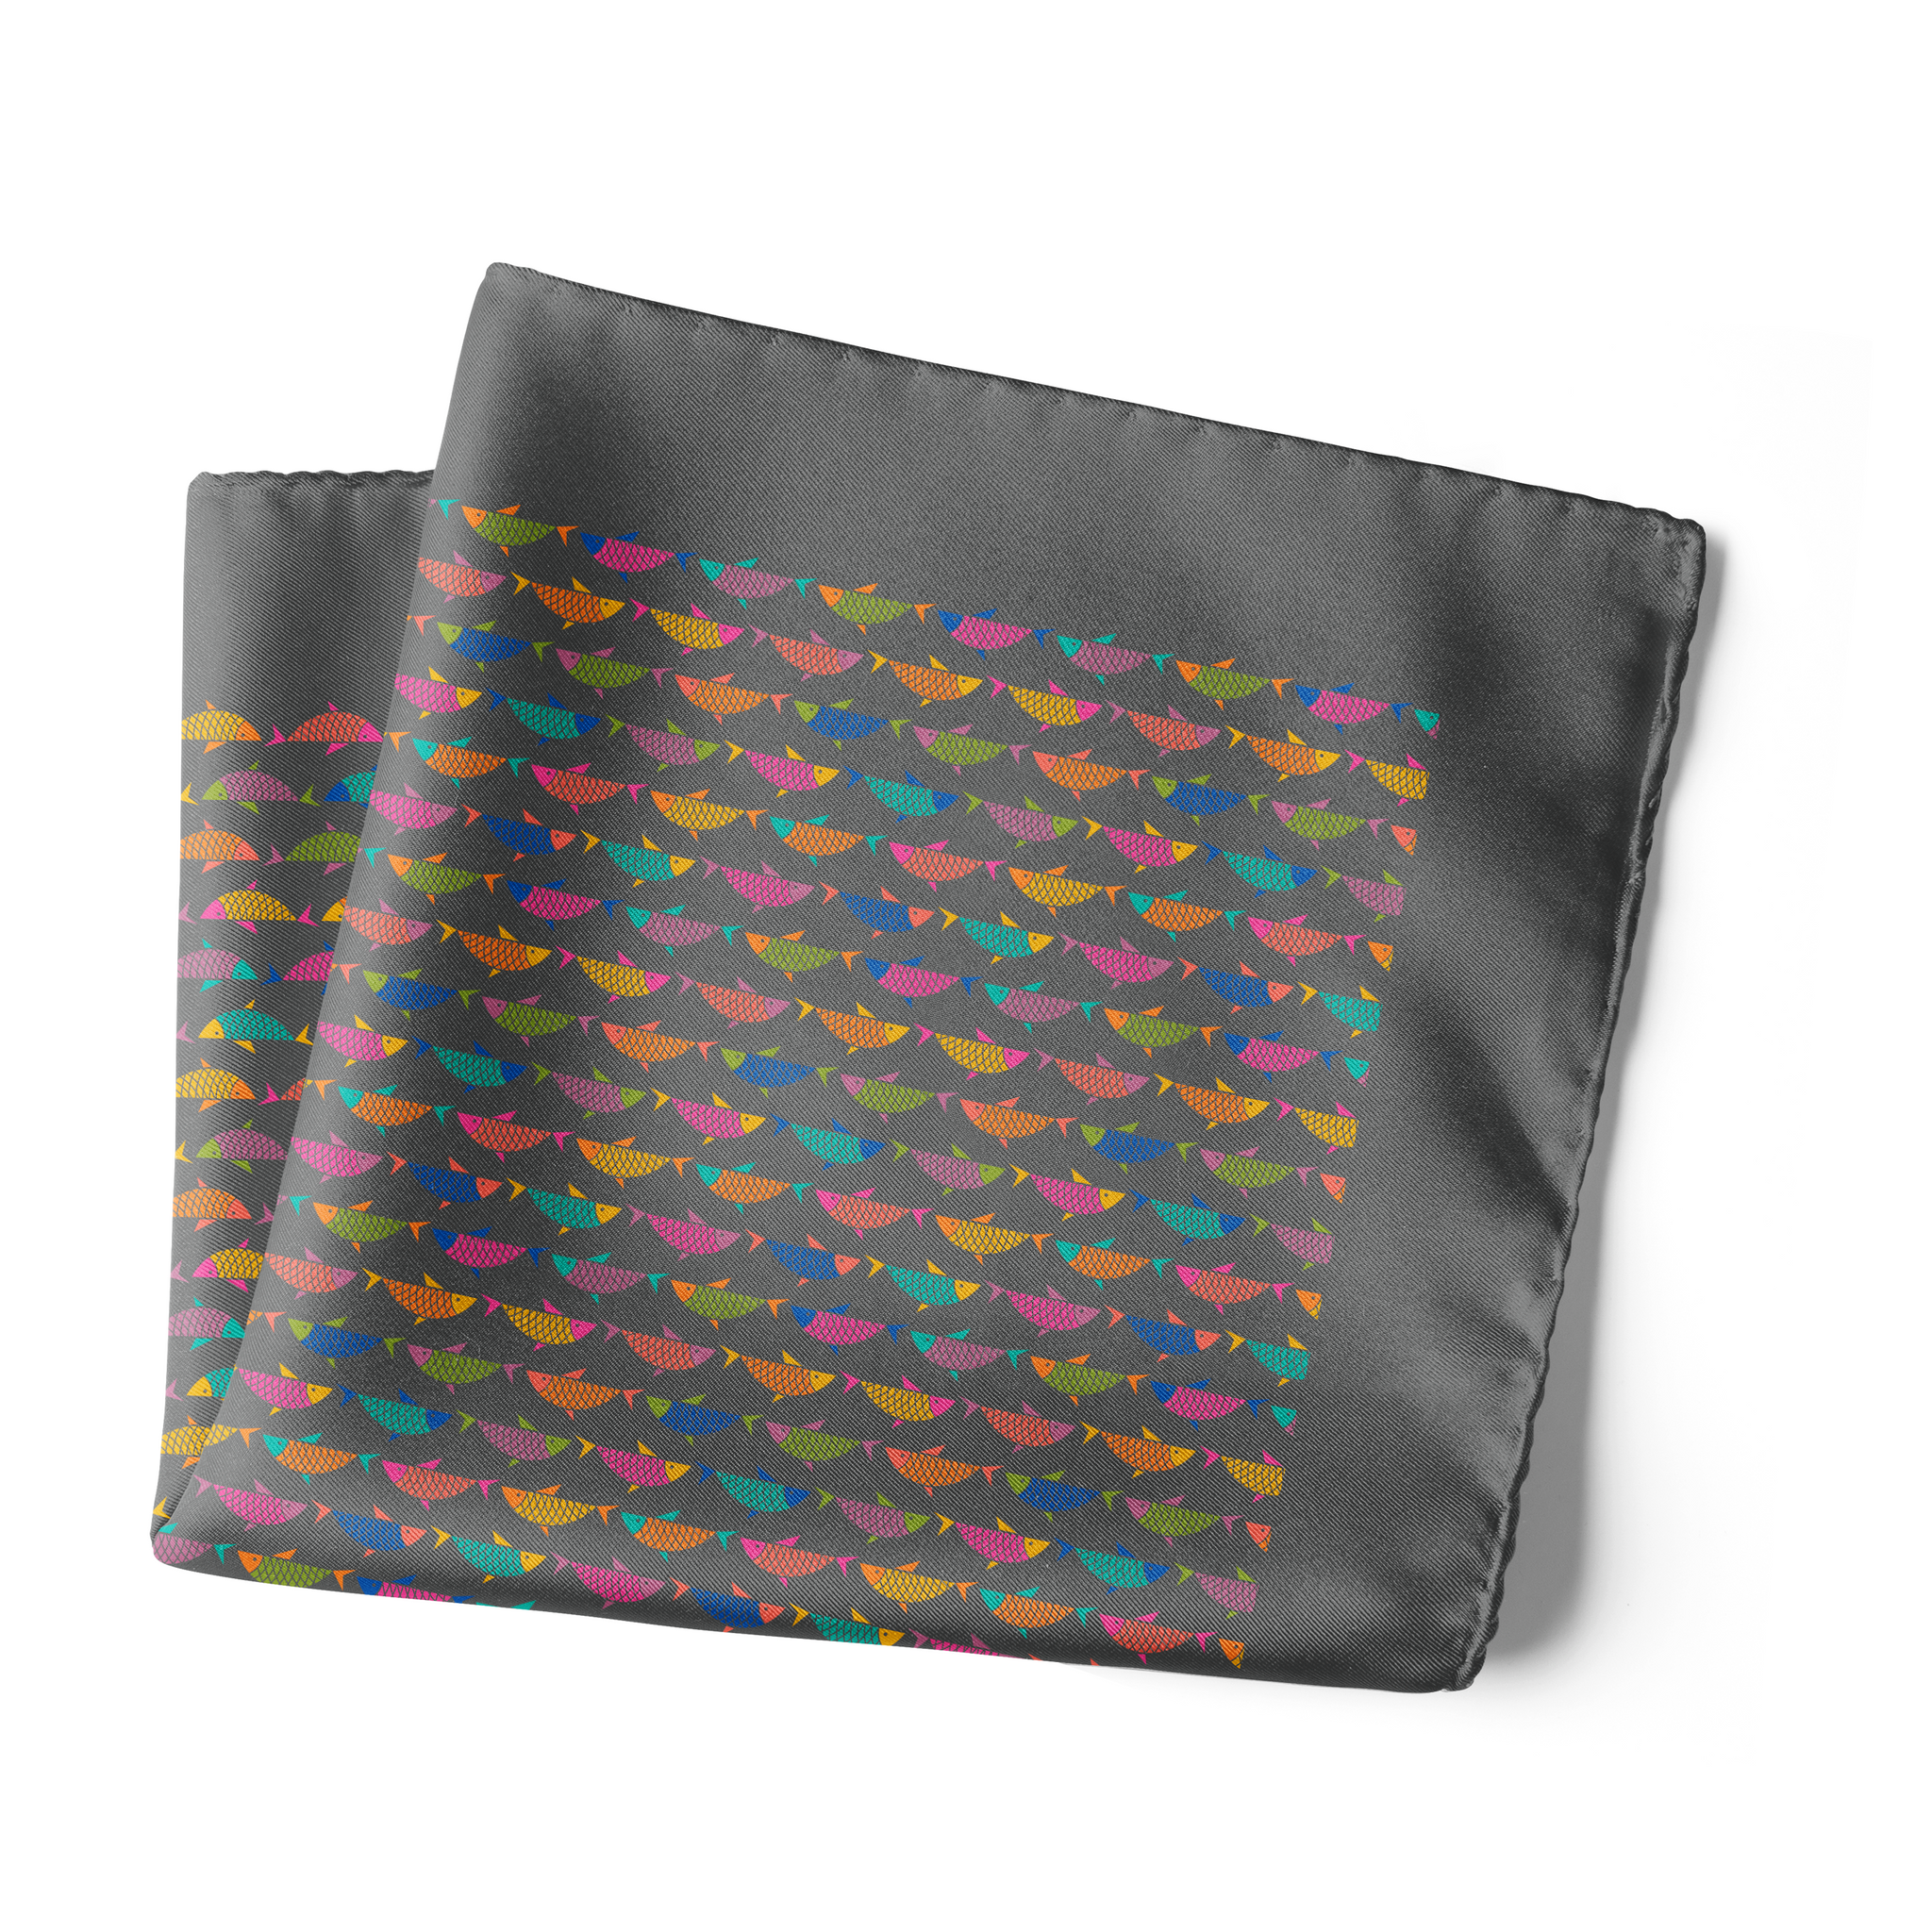 Chokore Grey and Multicoloured Satin Silk pocket square from the Wildlife Collection